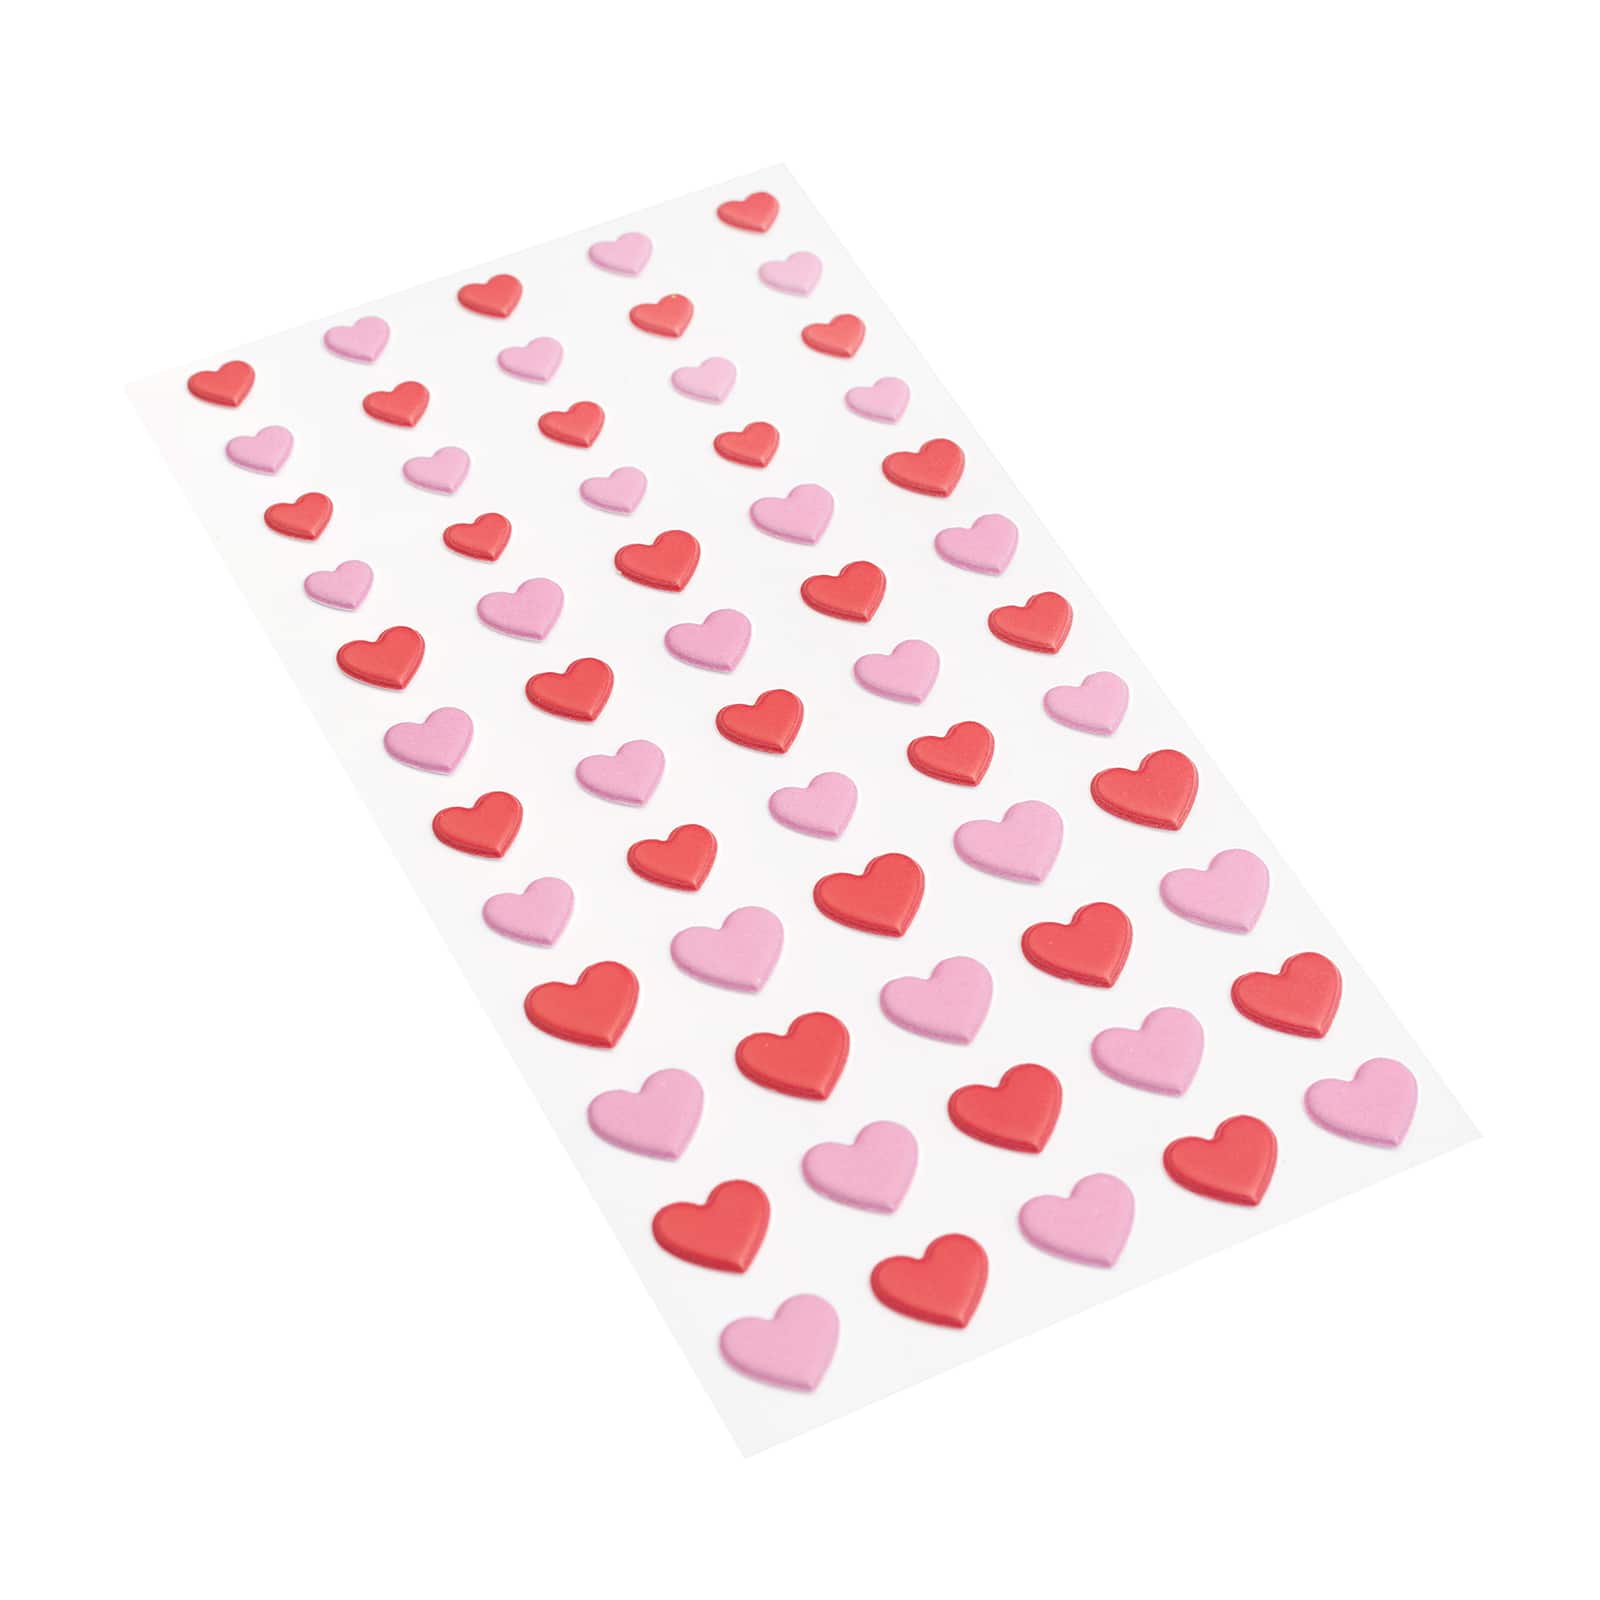 12 Packs: 60 Ct. (720 Total) Red & Pink Heart Puffy Stickers by Recollections, Size: 8.54 x 0.02 x 4.06